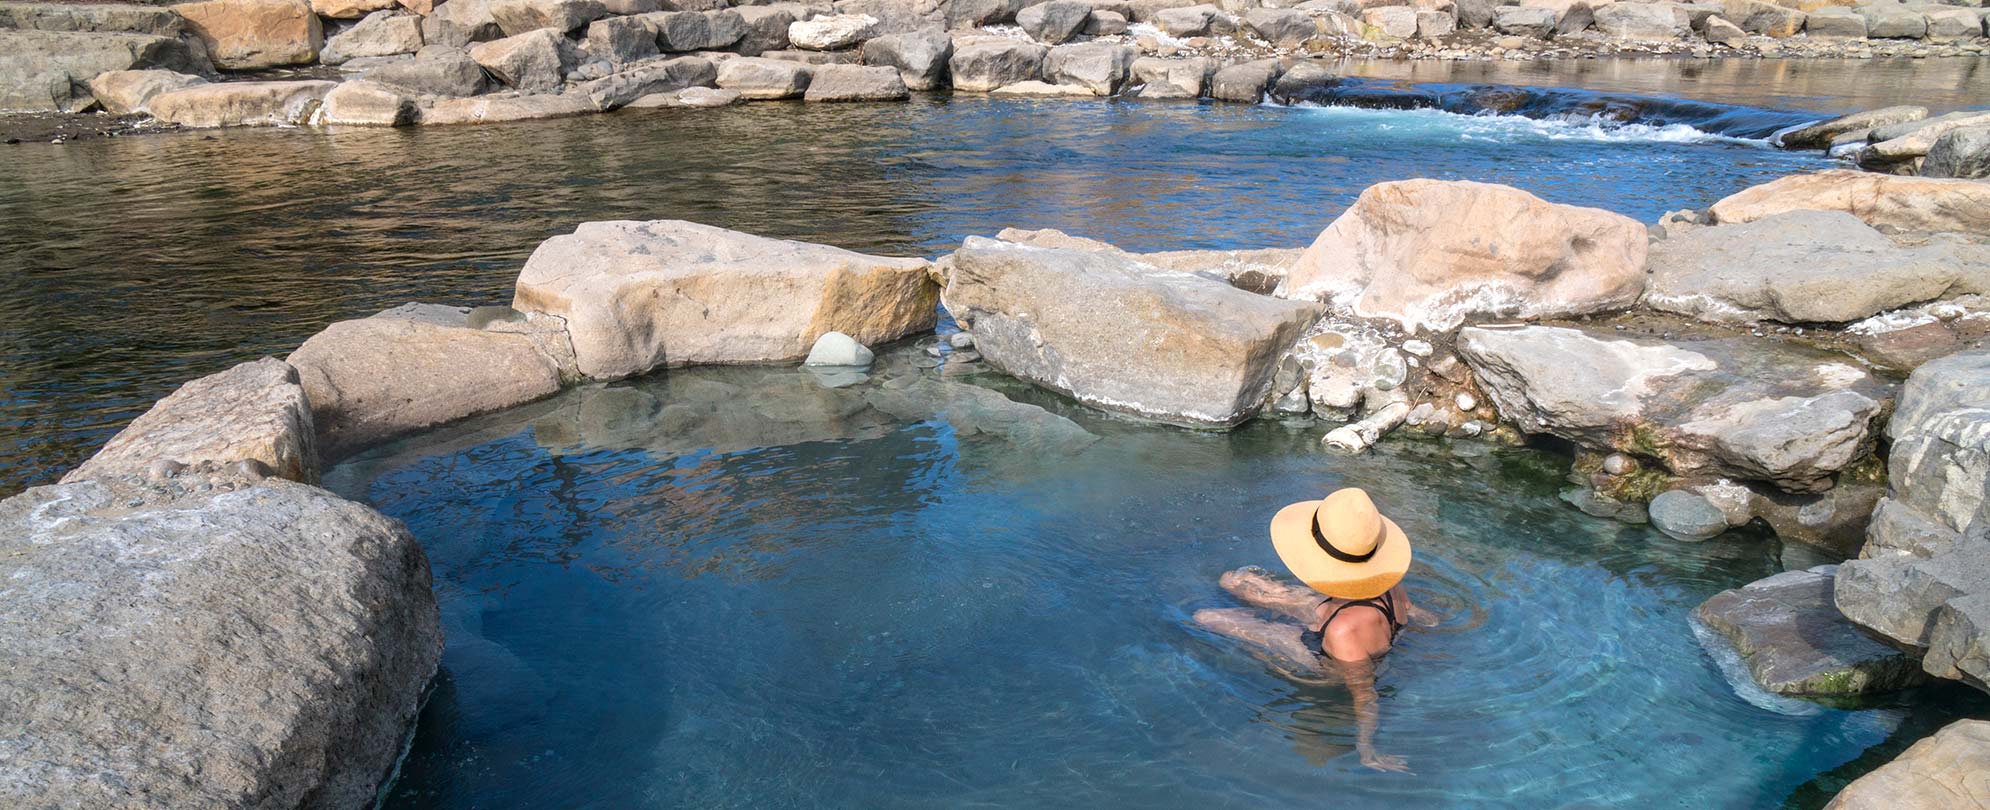 A woman wearing a sun hat sits in a pool of water surrounded by rocks at the San Juan River in Pagosa Springs, Colorado.